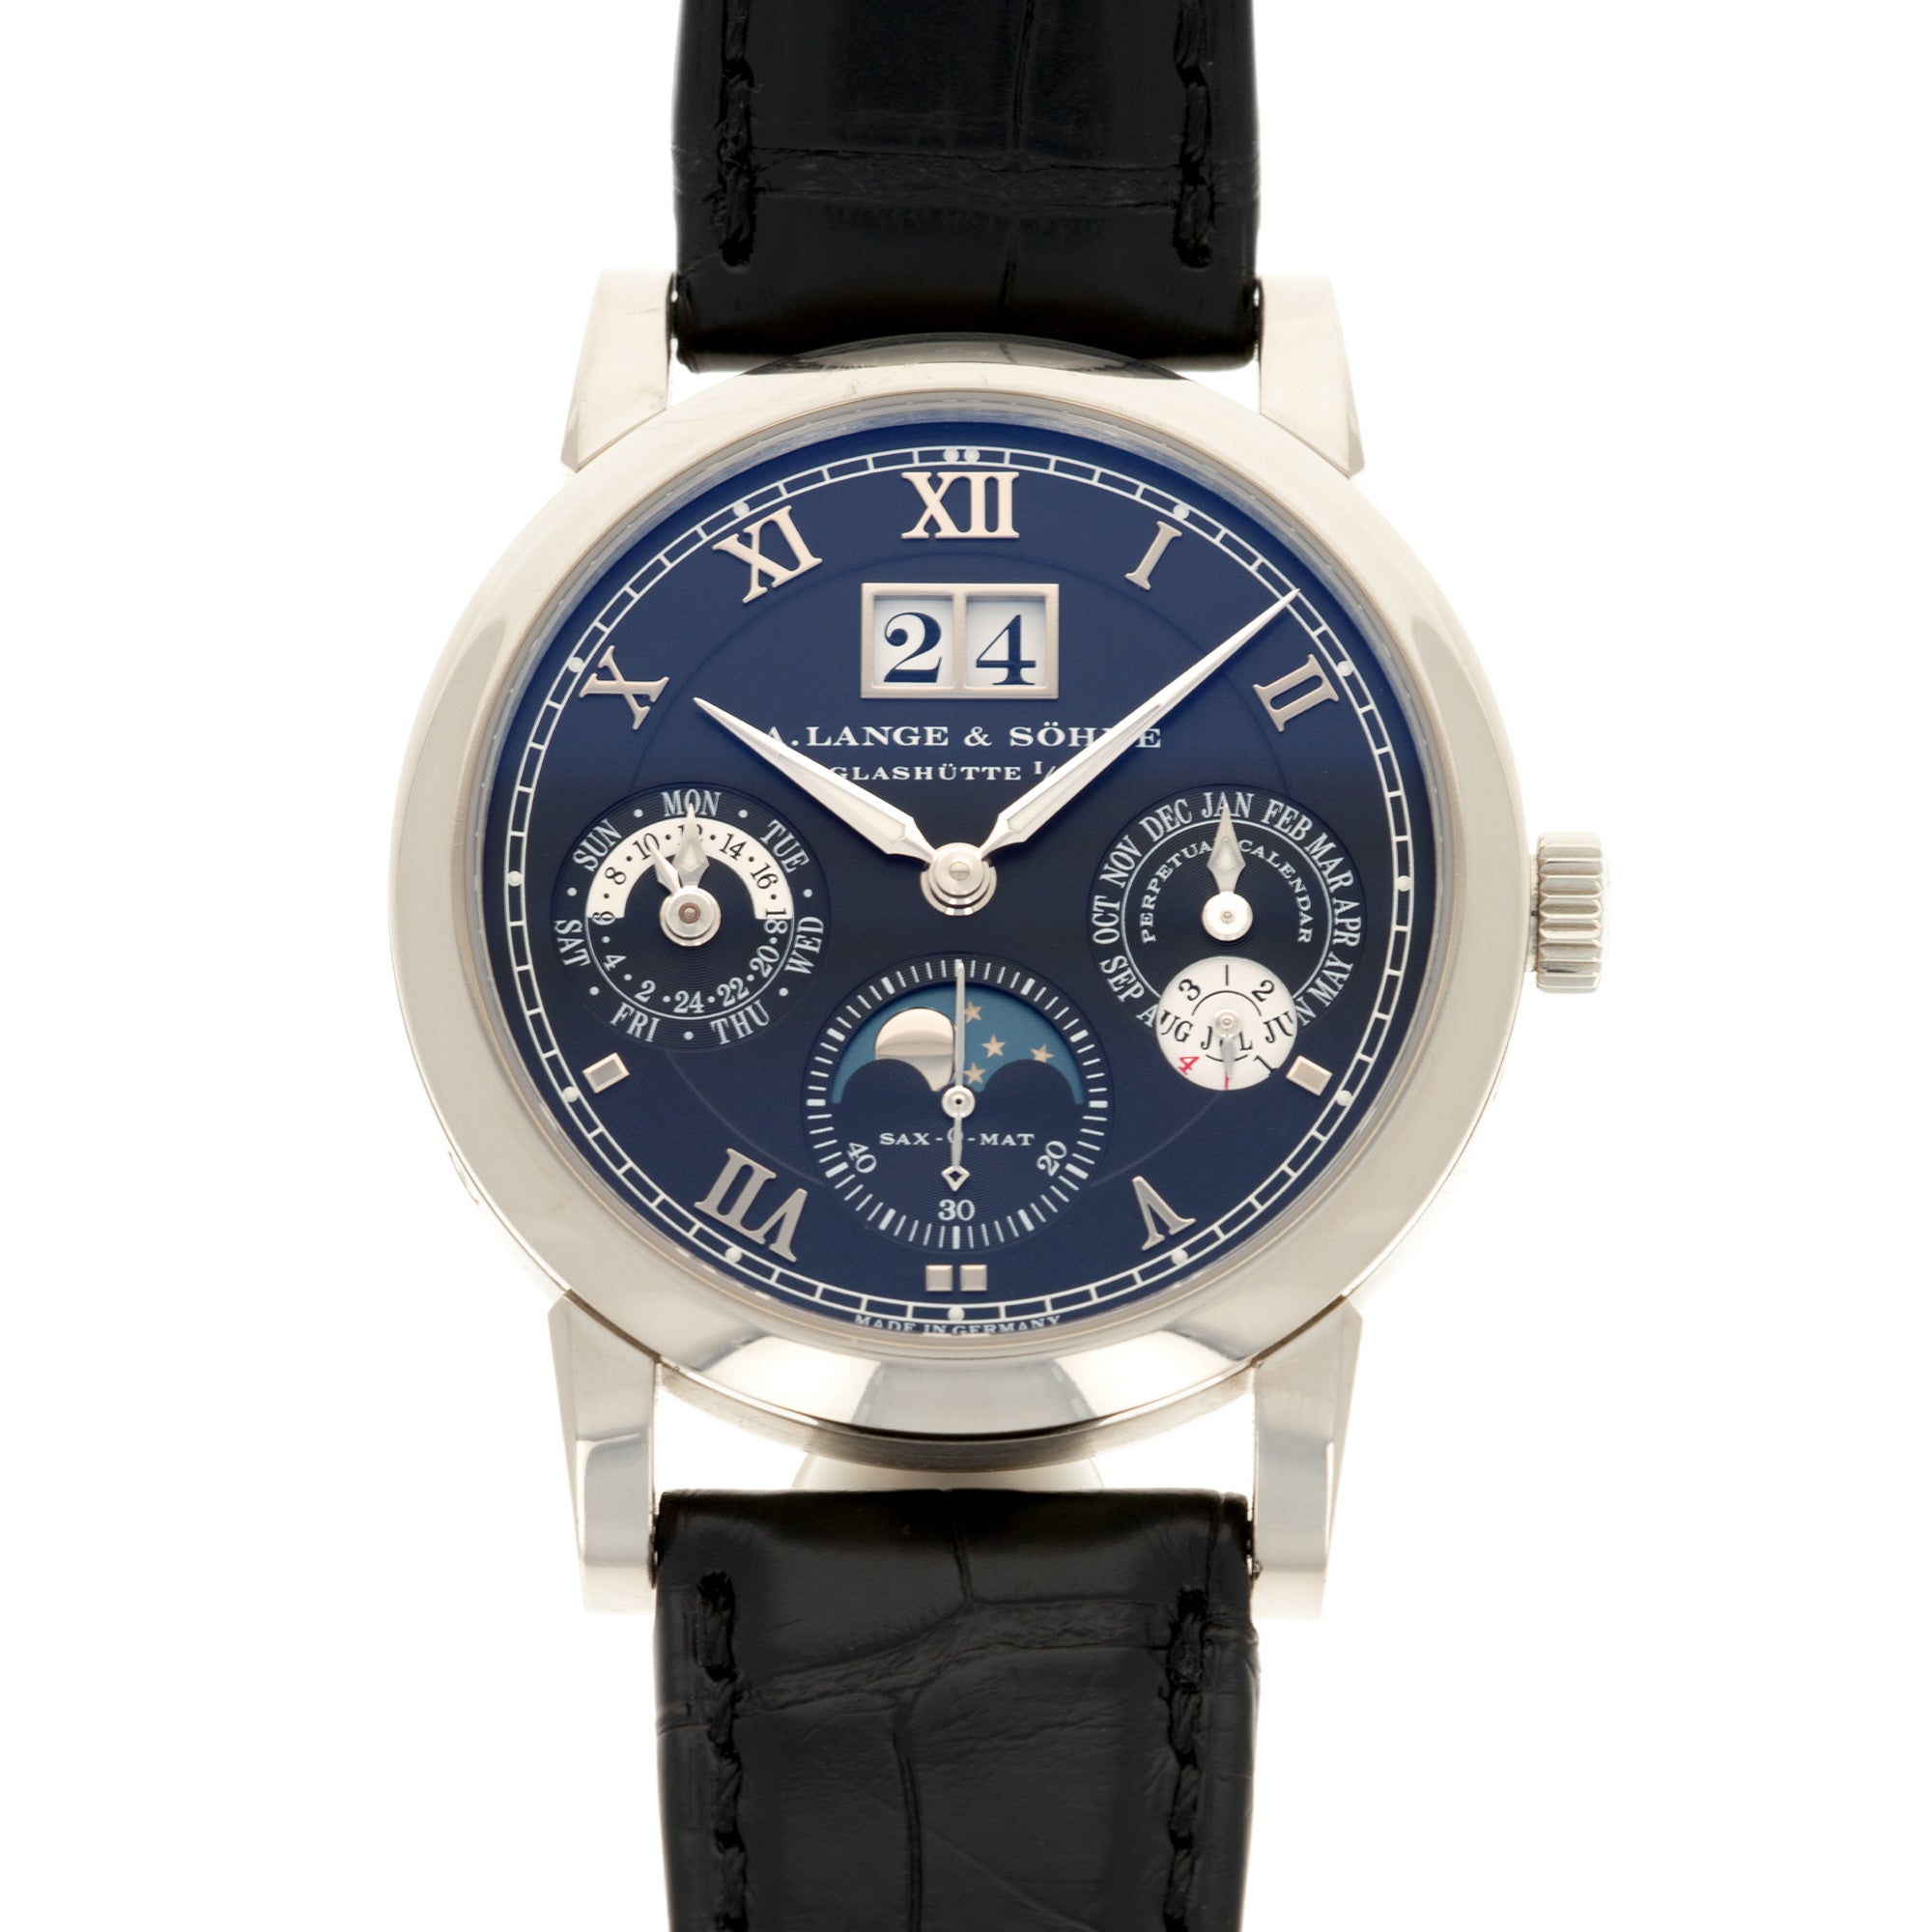 A. Lange &amp; Sohne - A. Lange &amp; Sohne White Gold Perpetual Calendar Watch Ref. 310.026 - The Keystone Watches